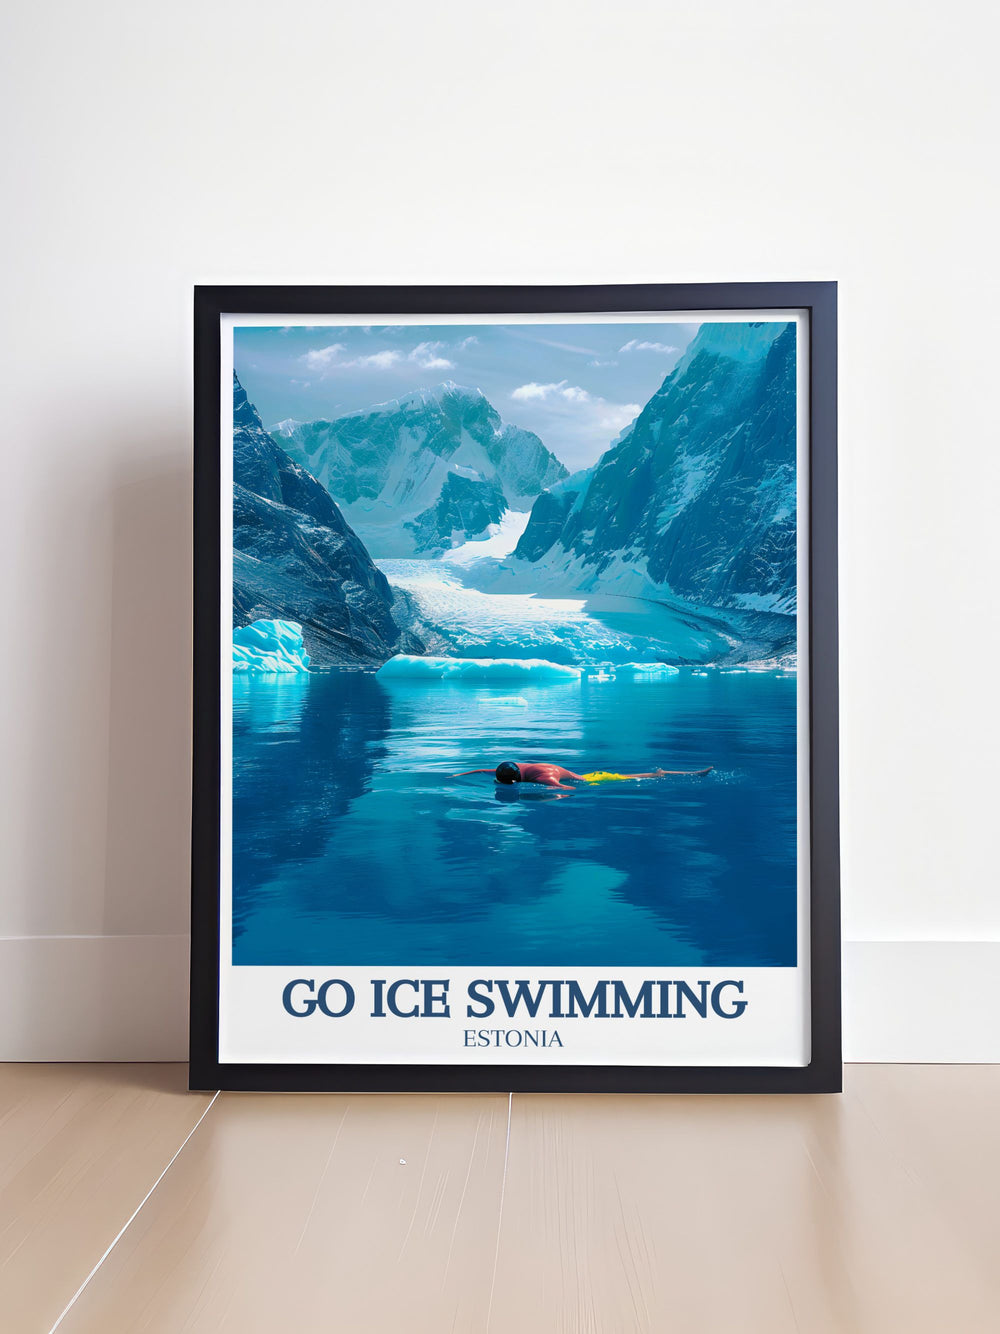 A vibrant print depicting adventurers ice swimming at the Ross Ice Shelf, showcasing the thrill and beauty of this extreme sport against the dramatic Antarctic landscape.